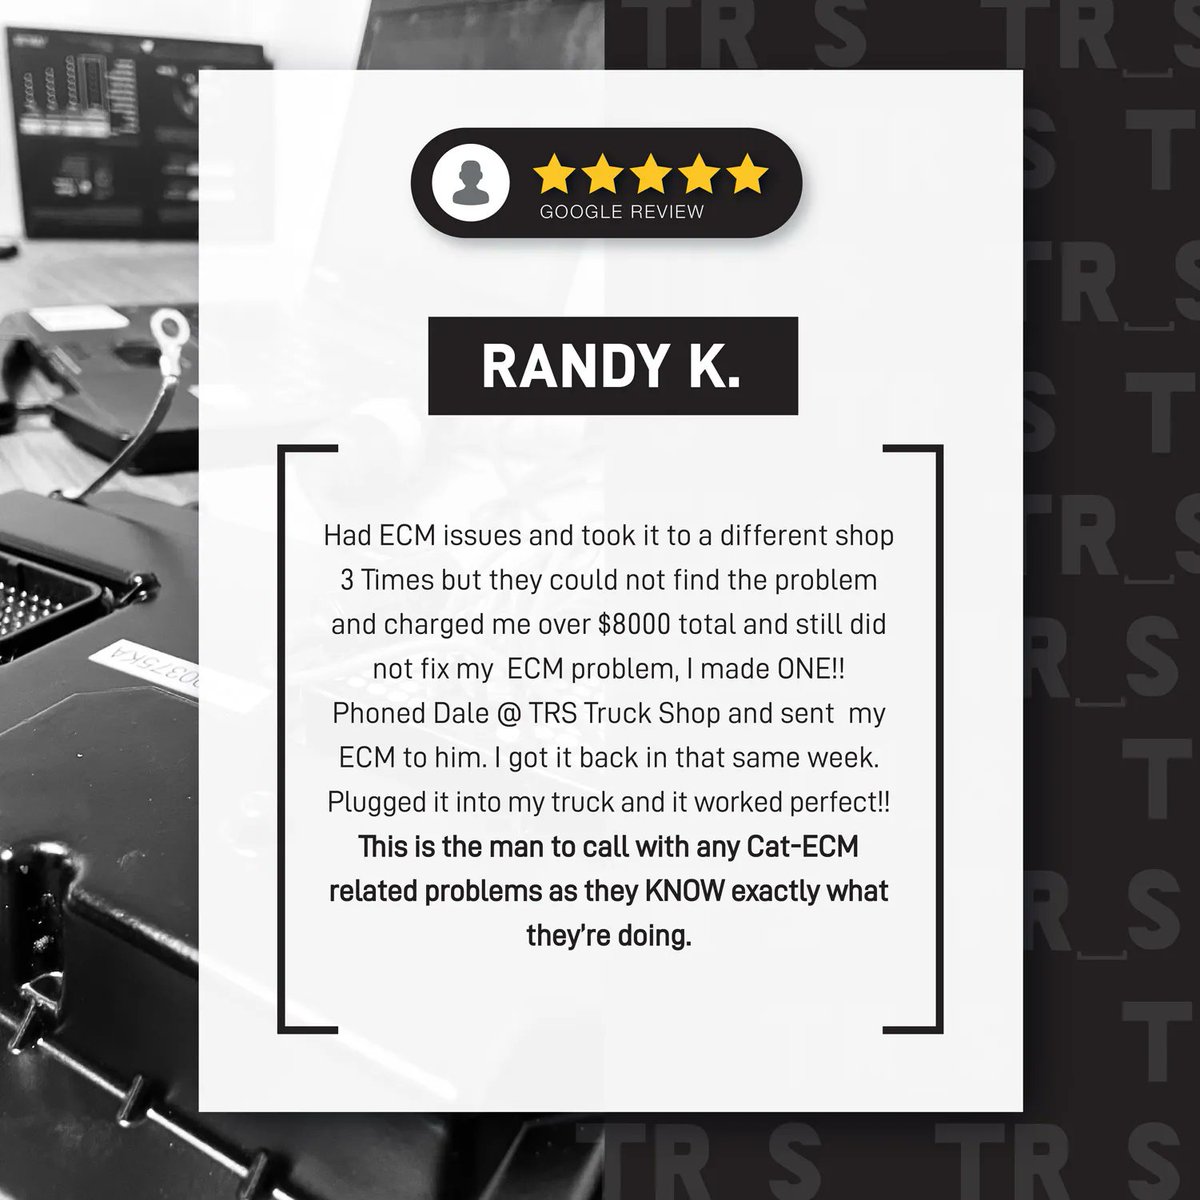 We love hearing from our customers! Visit our Google page to leave us a review 🚚 #Trucking #grease #service #parts #transmission #Farming #Transportation #semitruck #ownerop #truckshop #cummins #heavyhaul #volvo #dieseltrucks #ECM #diesel #hydraulic #tuning #customerservice